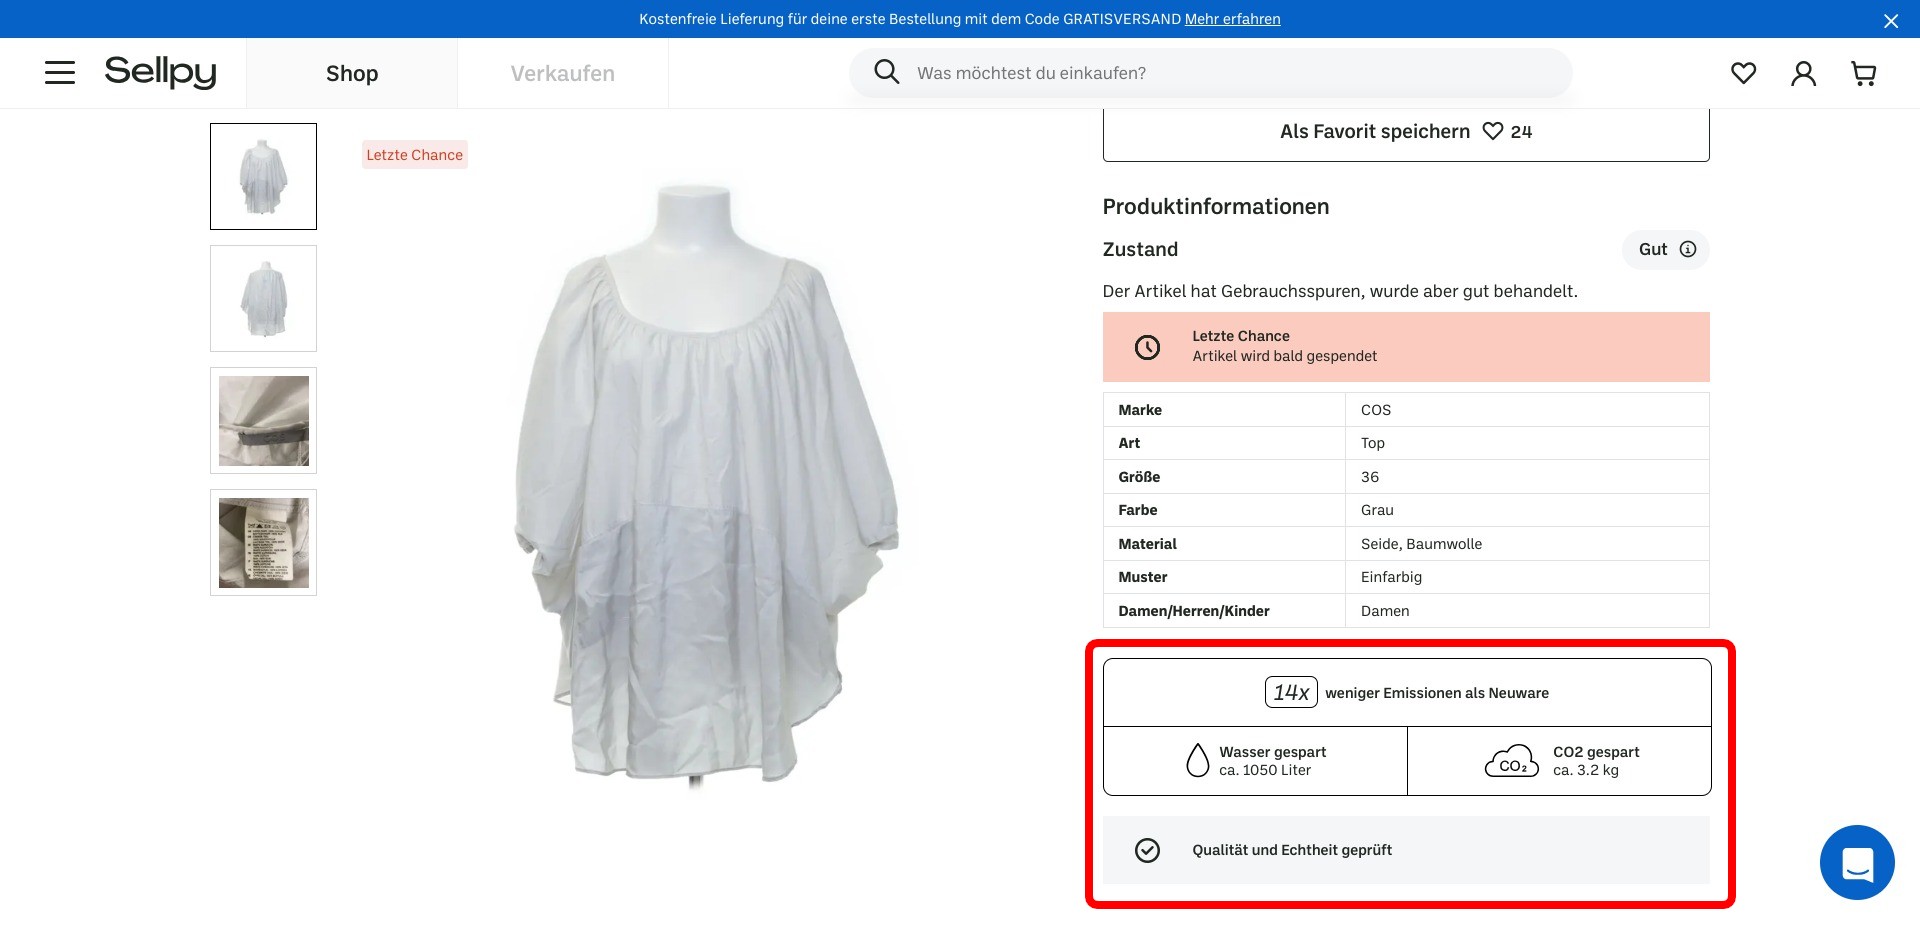 Screenshot of a random product listing on sellpy.de displaying information about quality, originality and environmental awareness